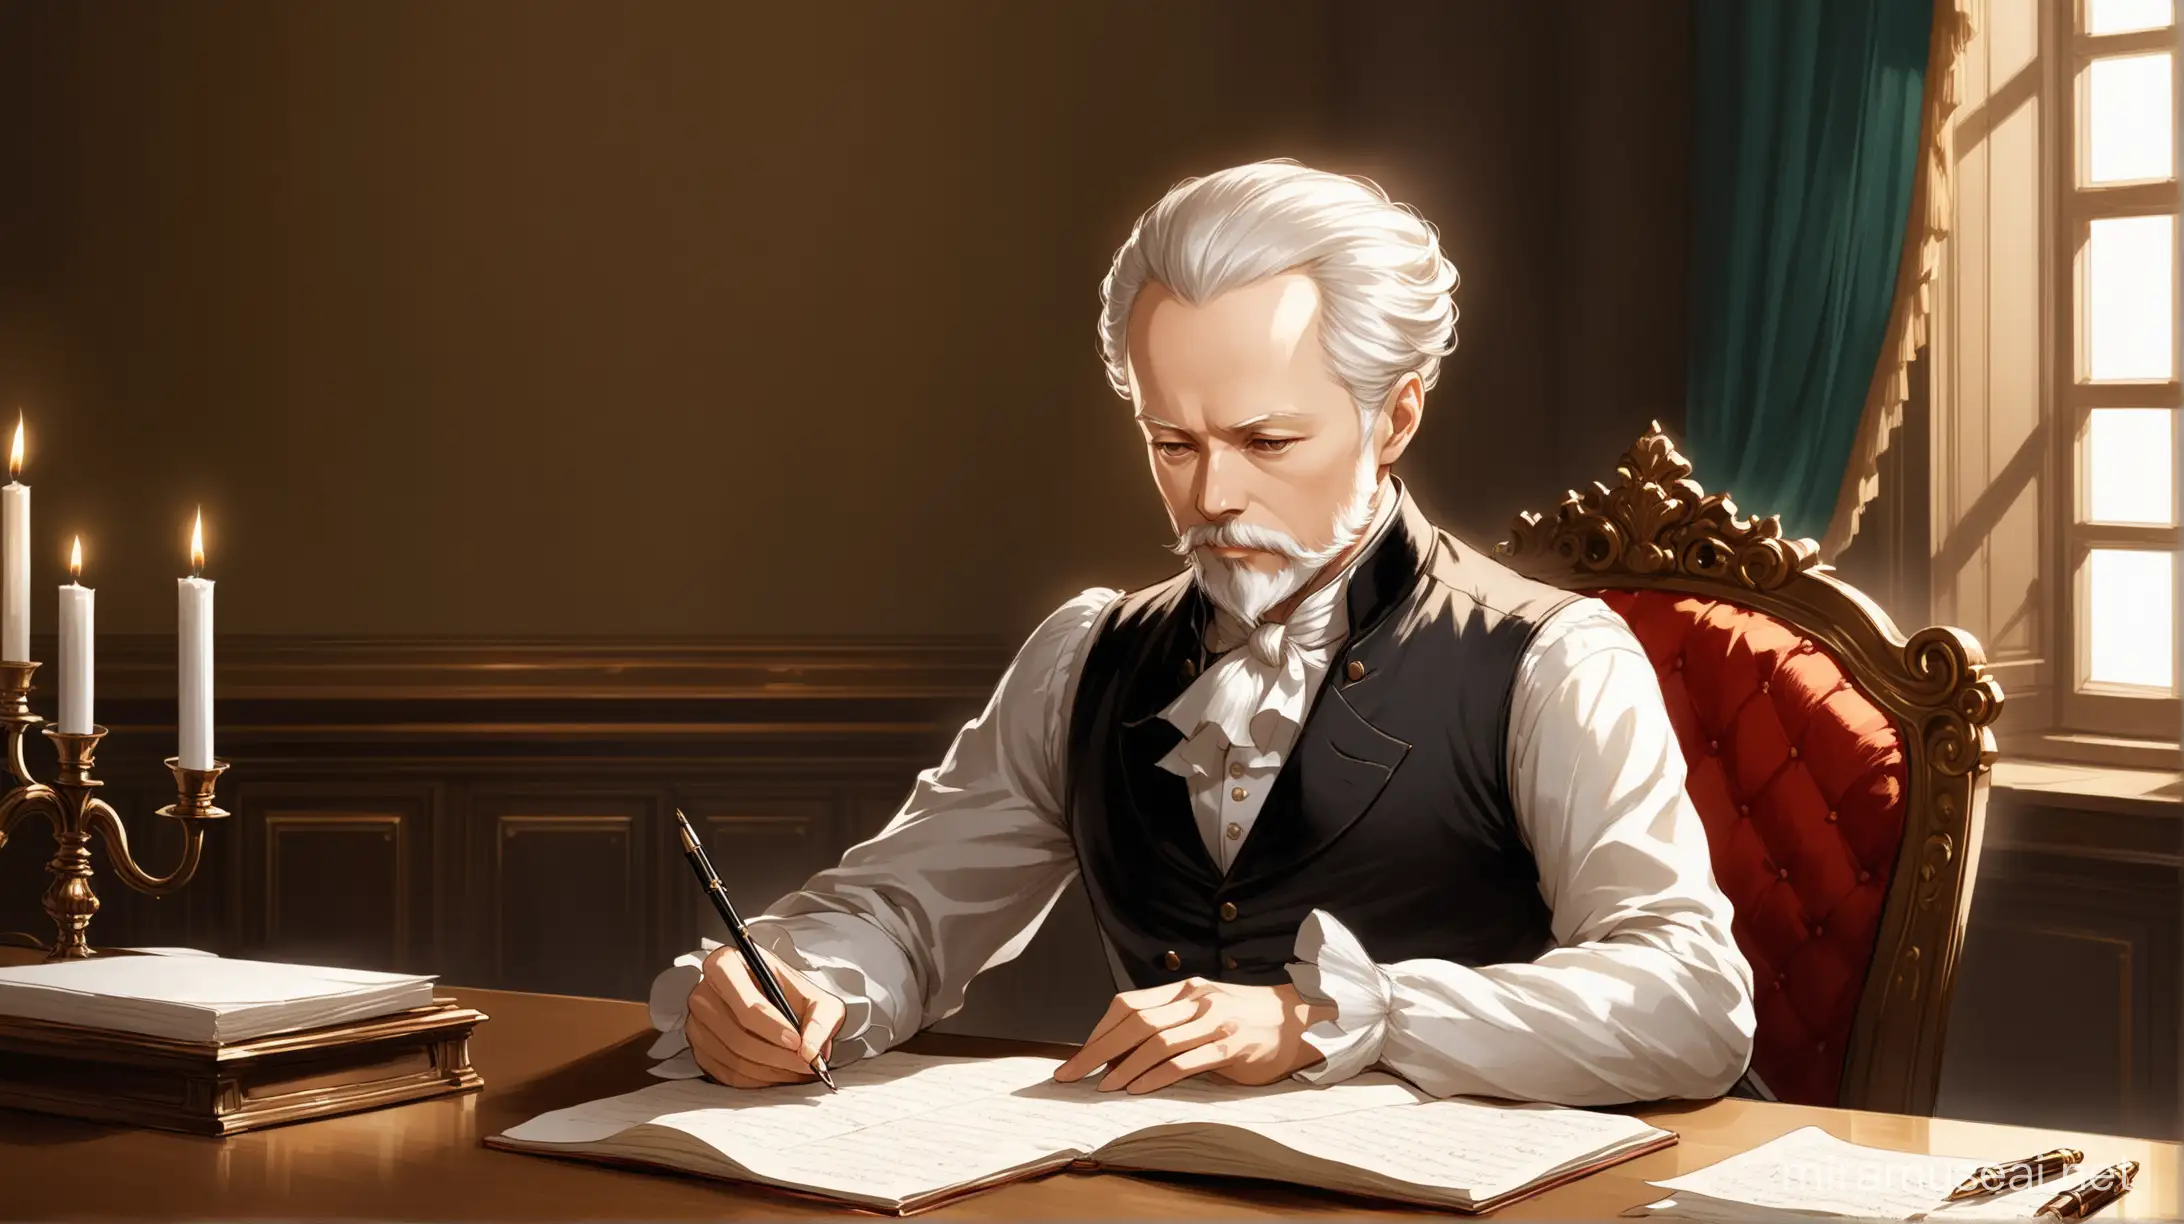 Tchaikovsky Composing Music in Baroquestyle Room